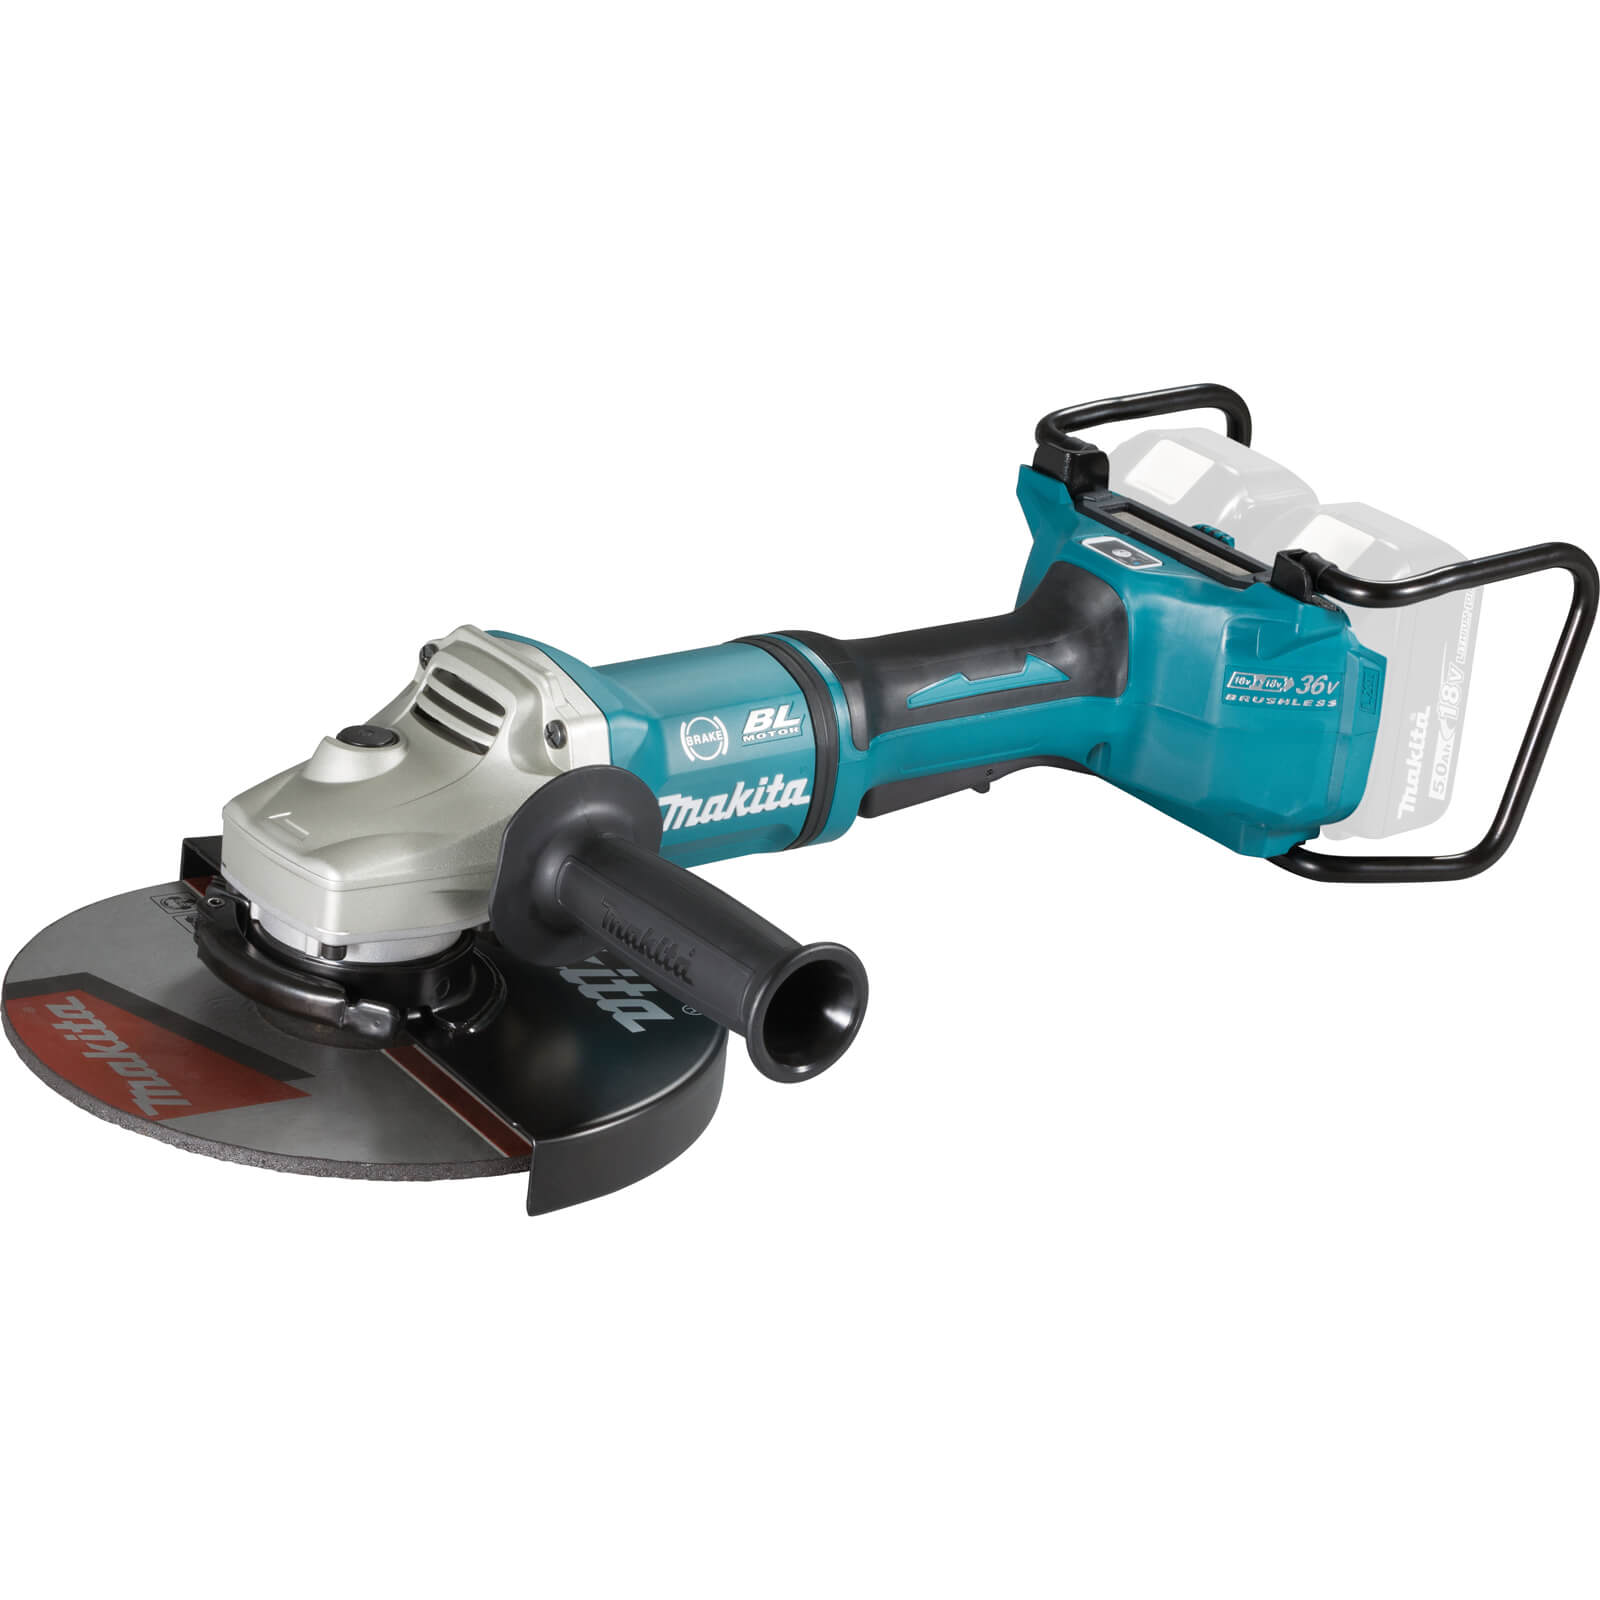 Image of Makita DGA901ZUX2 Twin 18v LXT Cordless Brushless Angle Grinder 230mm No Batteries No Charger No Case